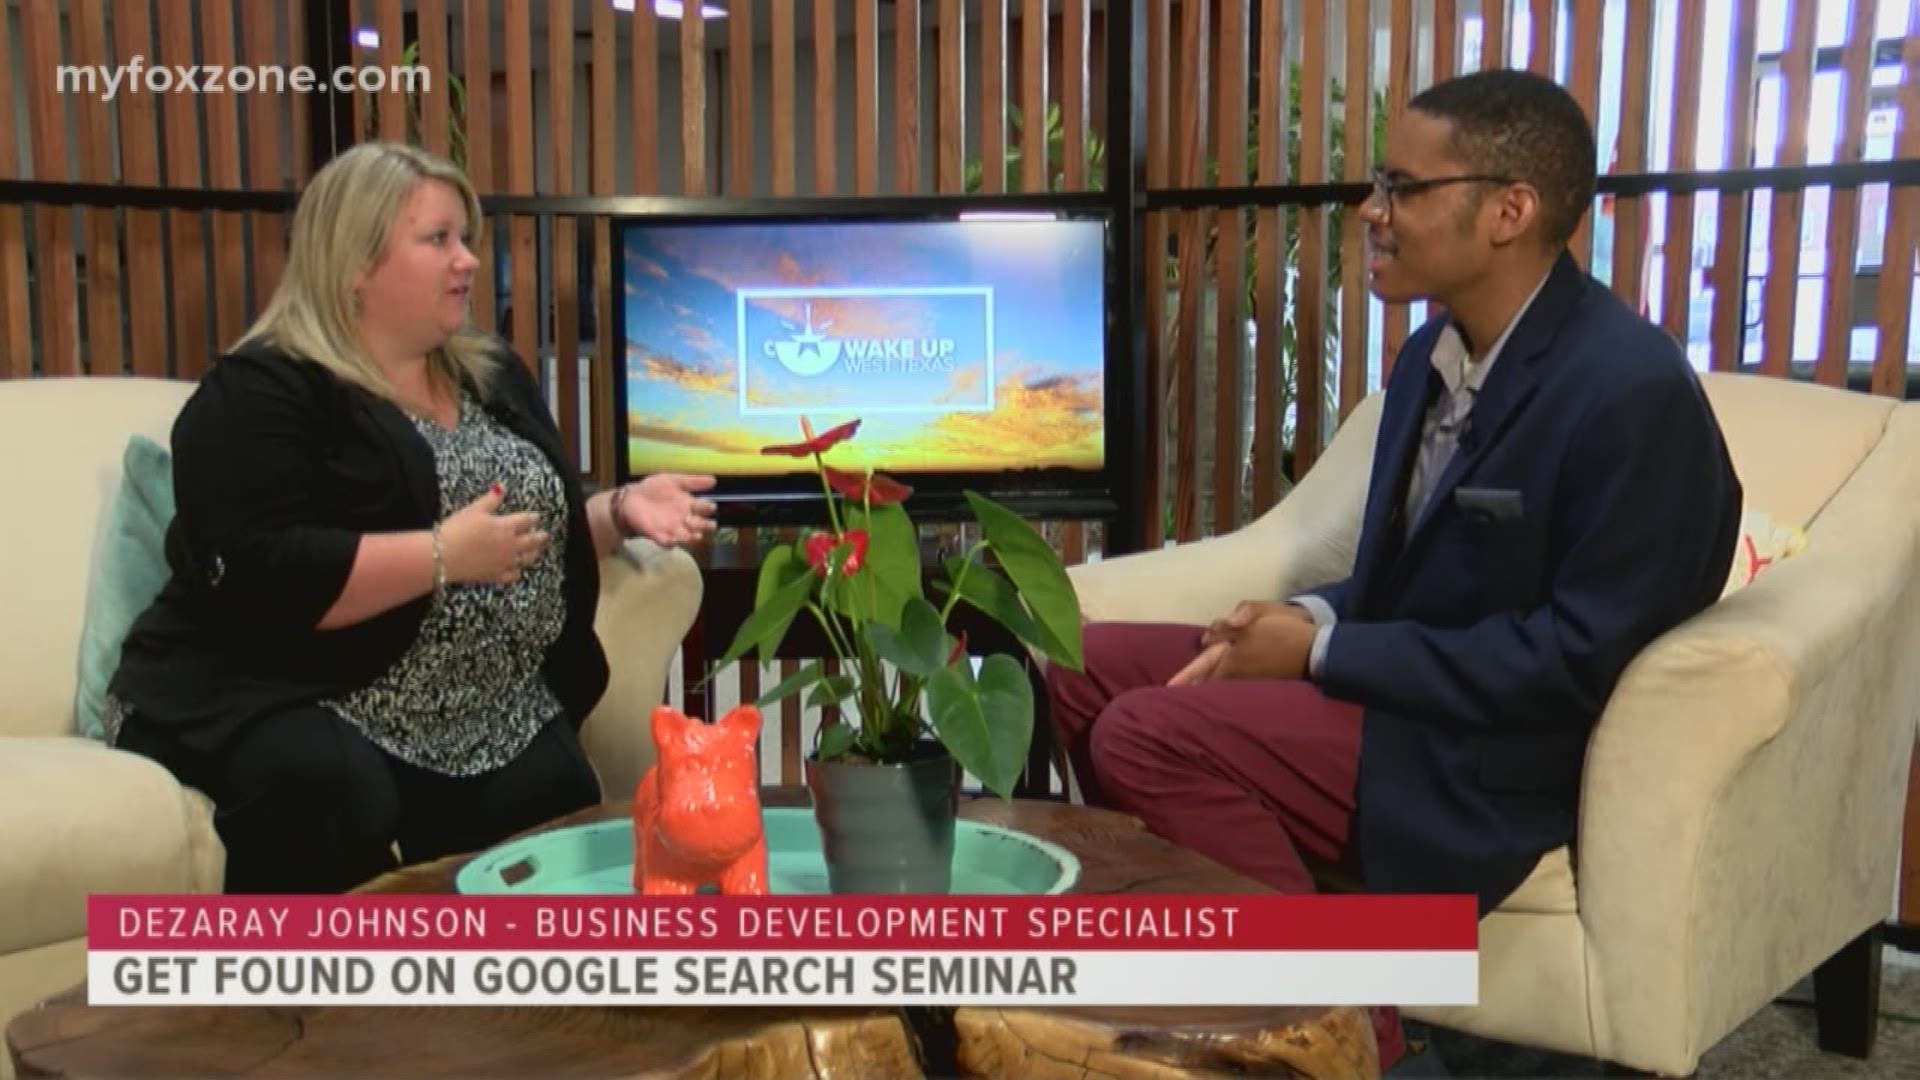 Our Malik Mingo speaks with the Small Business Development Center at Angelo State University about an upcoming seminar to help you get found on Google search.